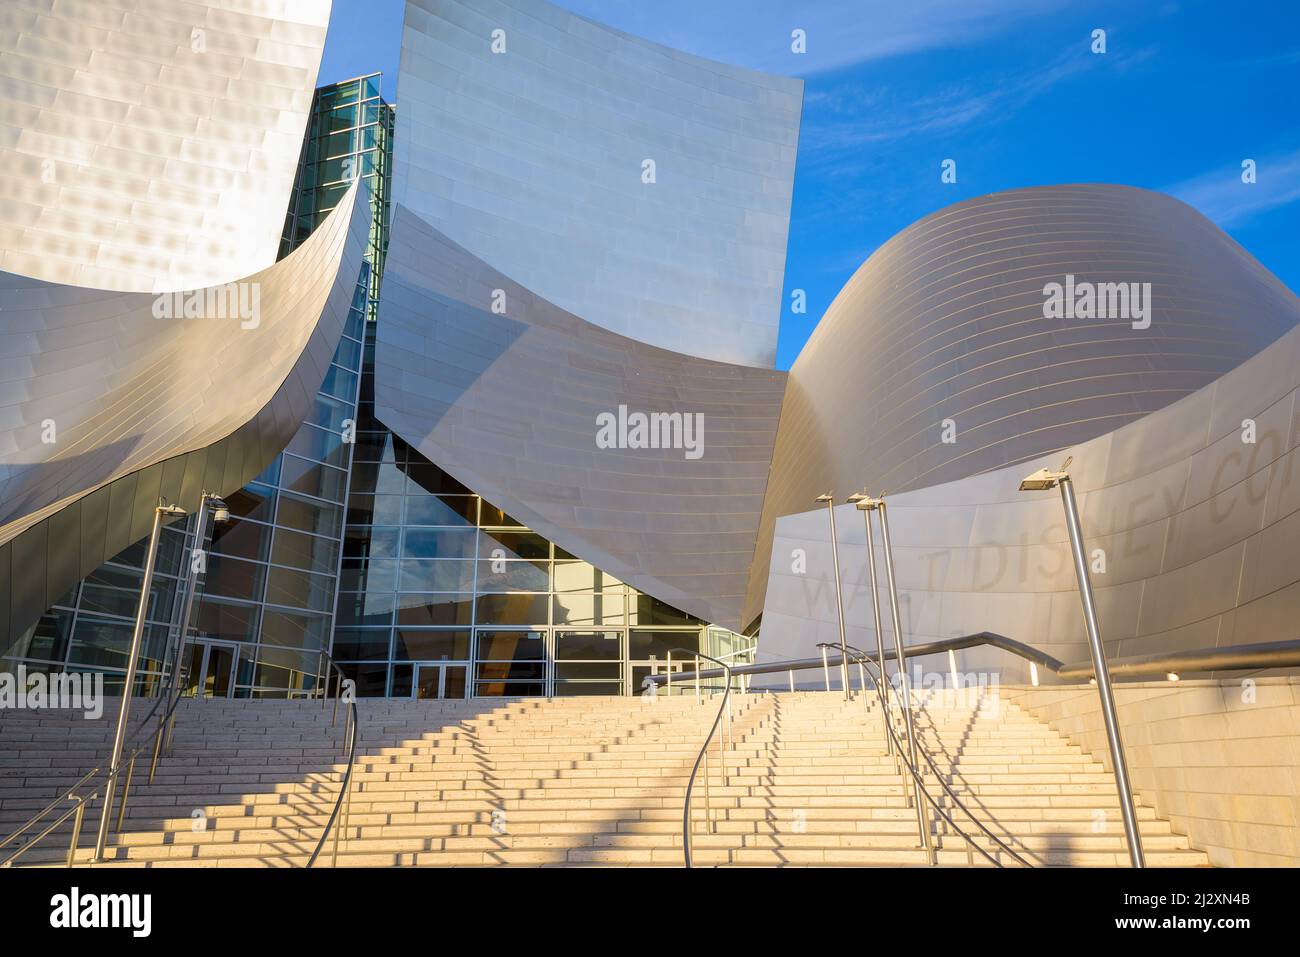 LOS ANGELES, CALIFORNIA - November 7, 2013: Walt Disney Concert Hall in LA. The building was designed by Frank Gehry and opened in 2003. Stock Photo